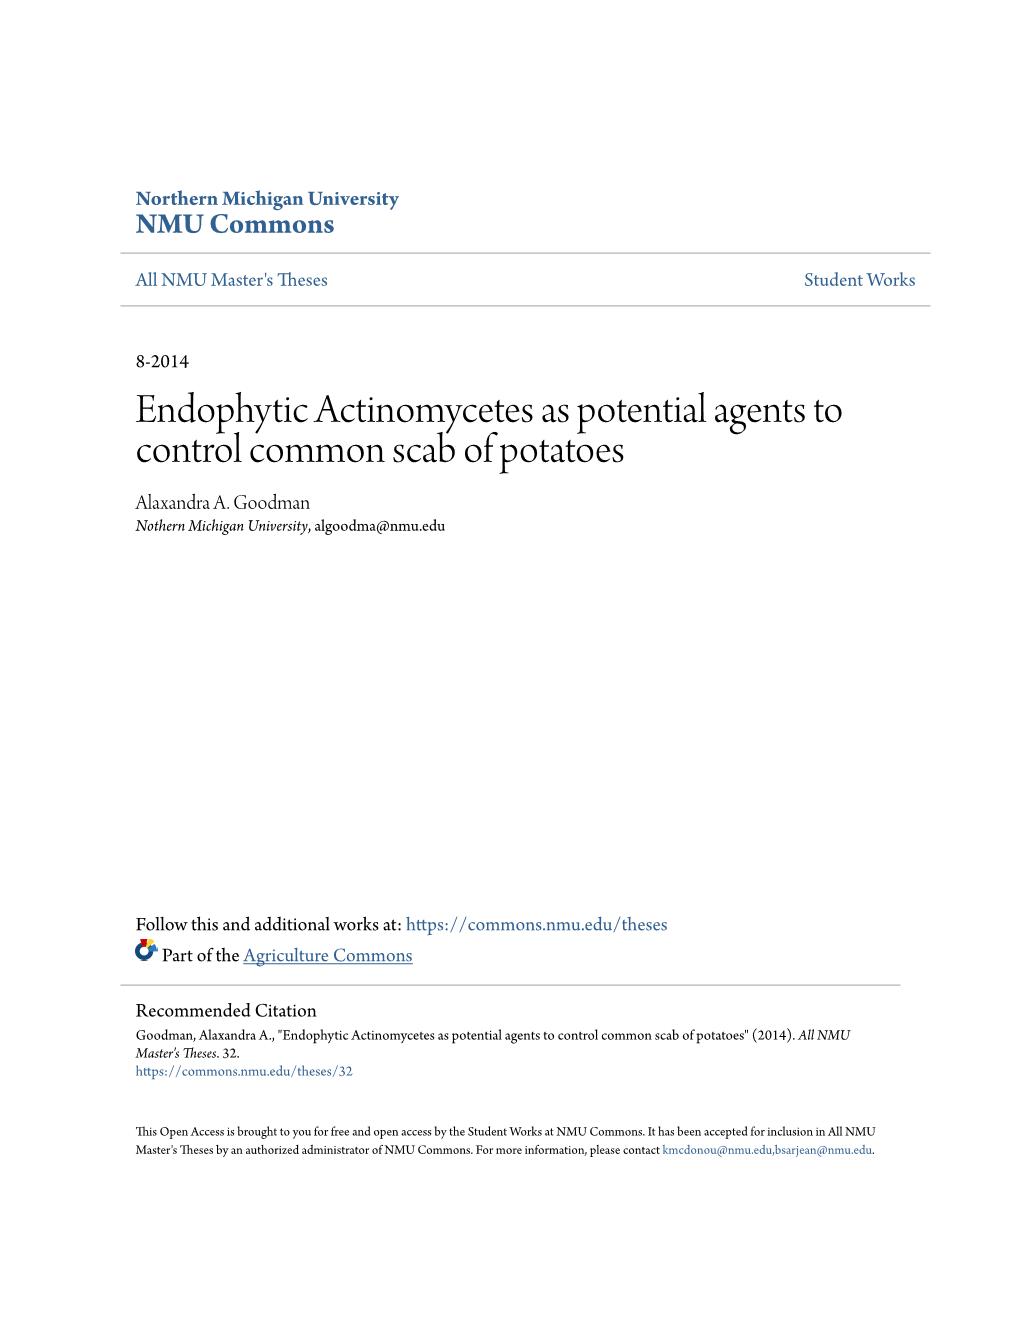 Endophytic Actinomycetes As Potential Agents to Control Common Scab of Potatoes Alaxandra A